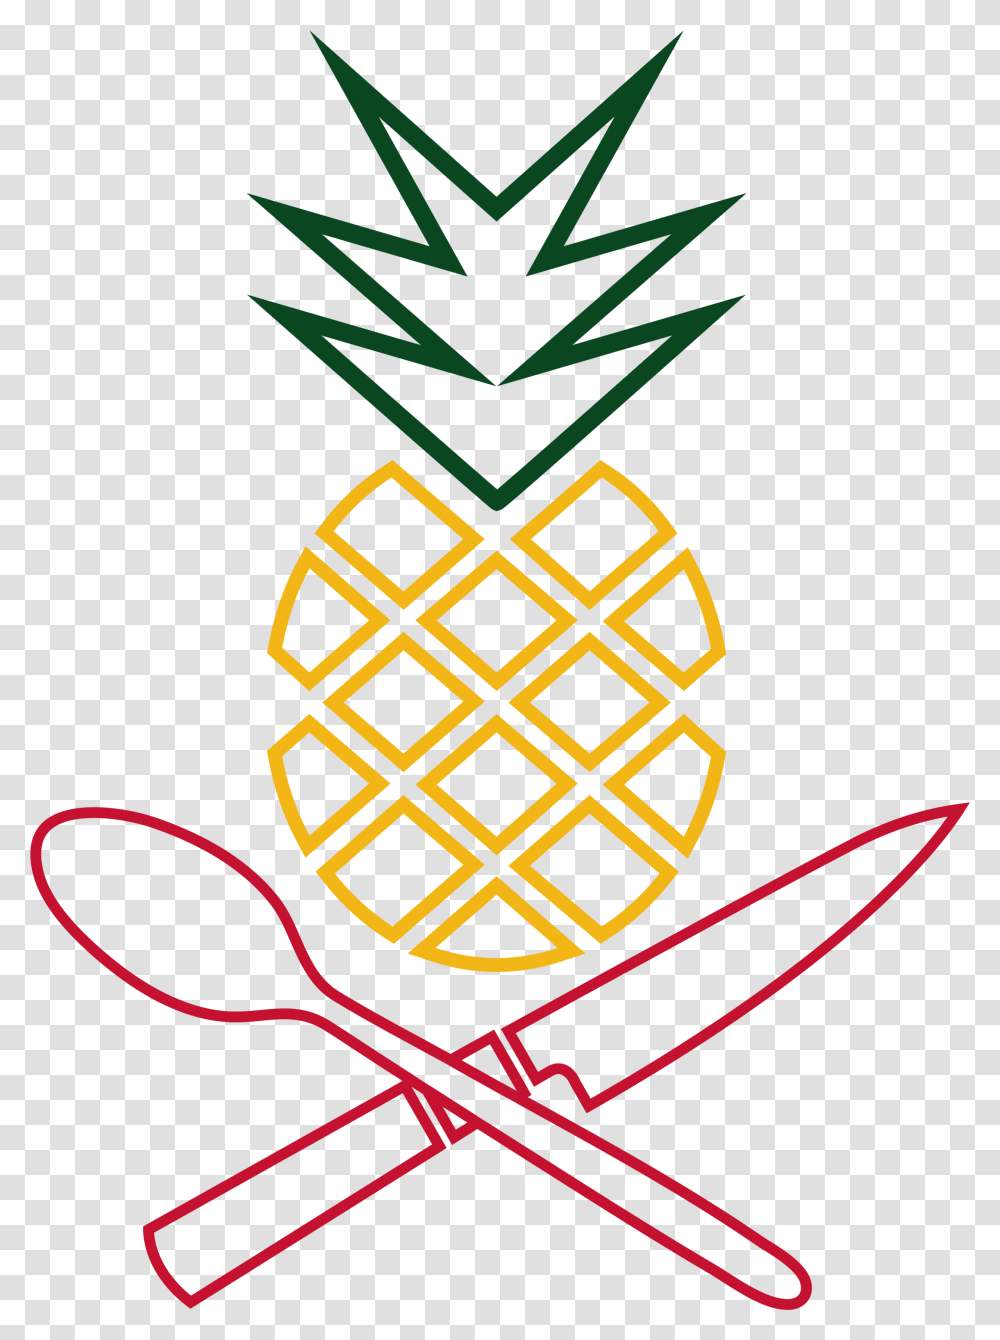 The Pineapple Sticker Braden Williams, Symbol, Dynamite, Bomb, Weapon Transparent Png